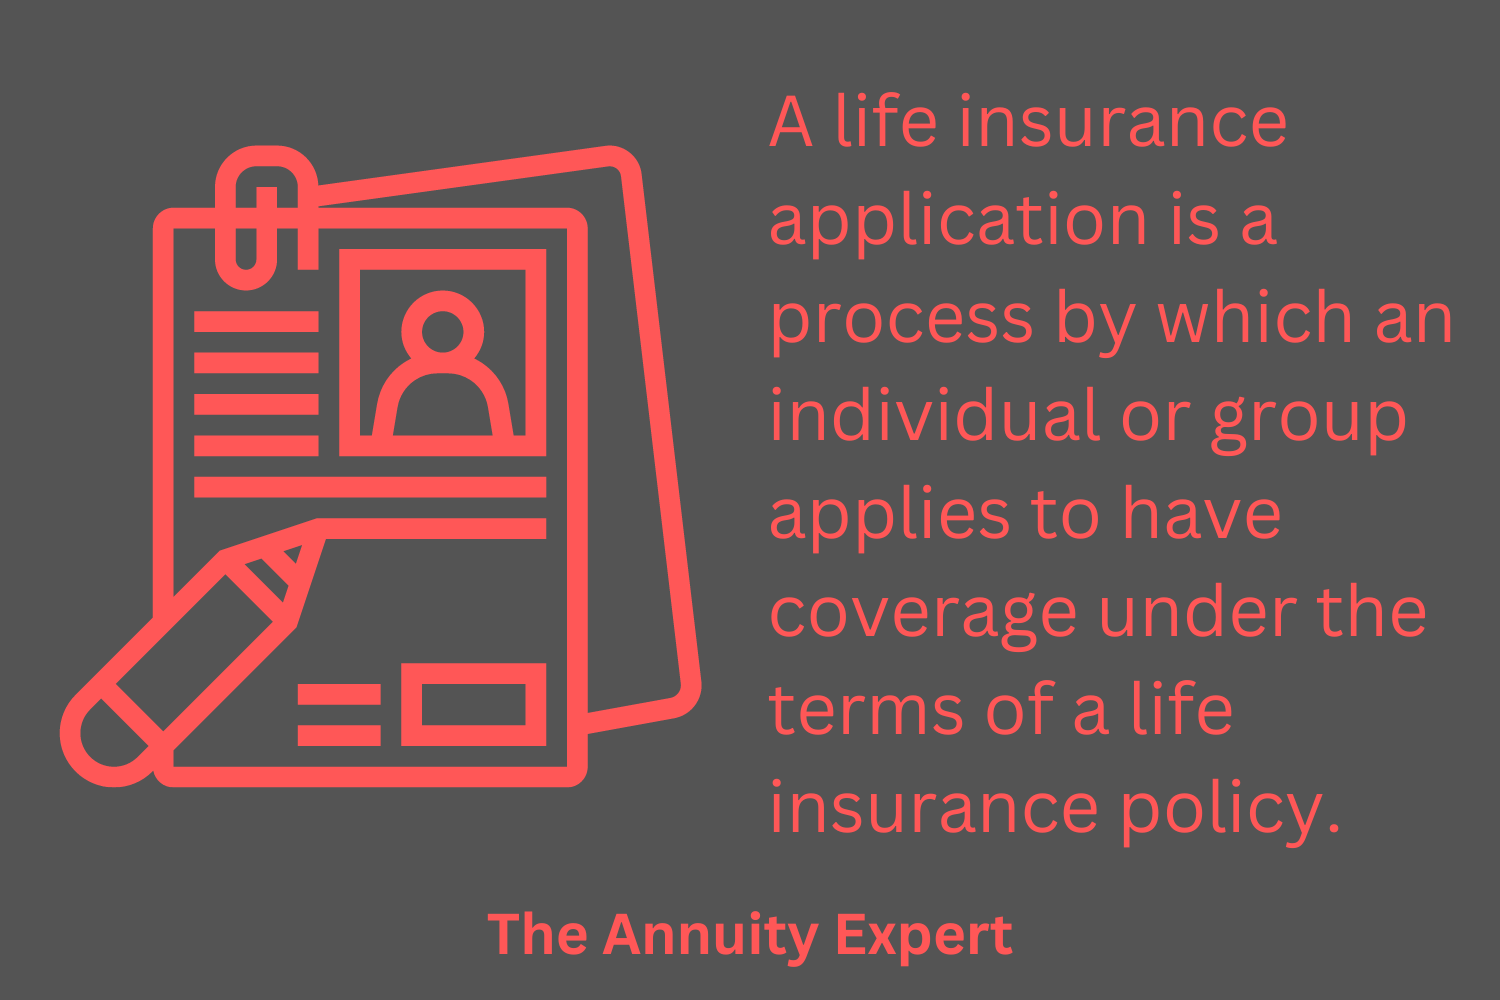 What Is A Life Insurance Application?